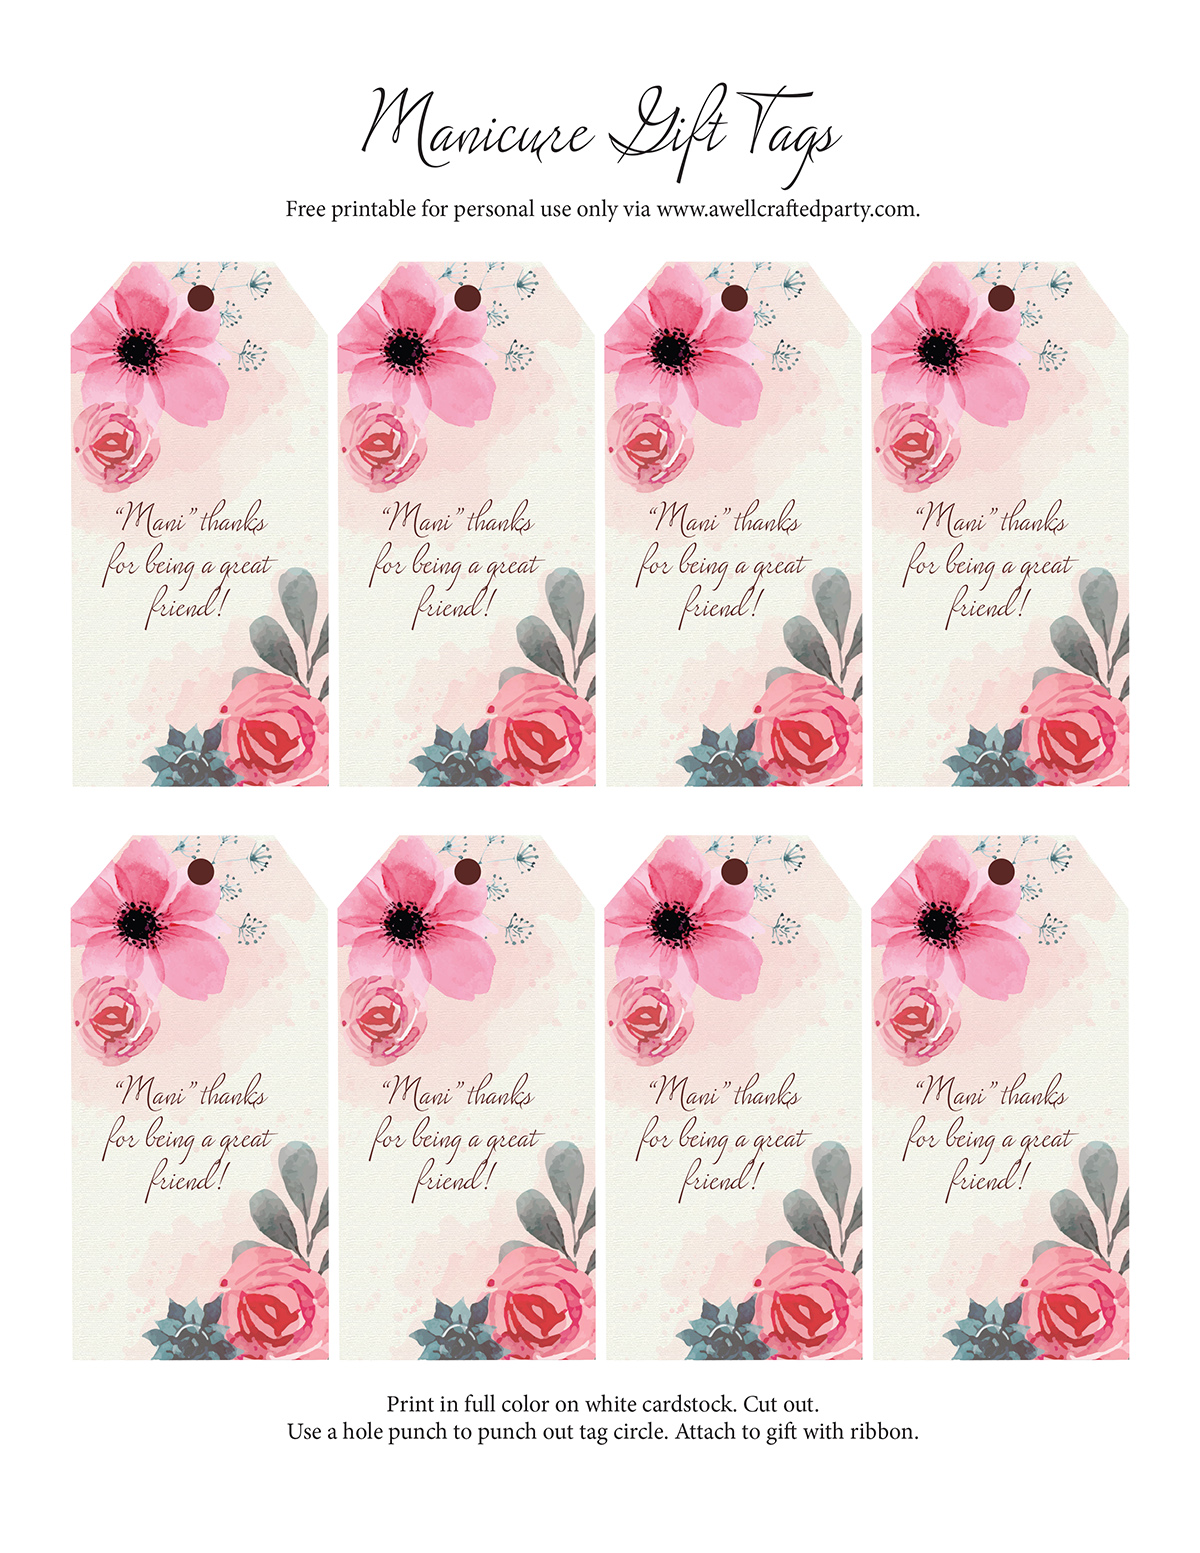 "Mani" Thanks gift tags free printables - A Well Crafted Party